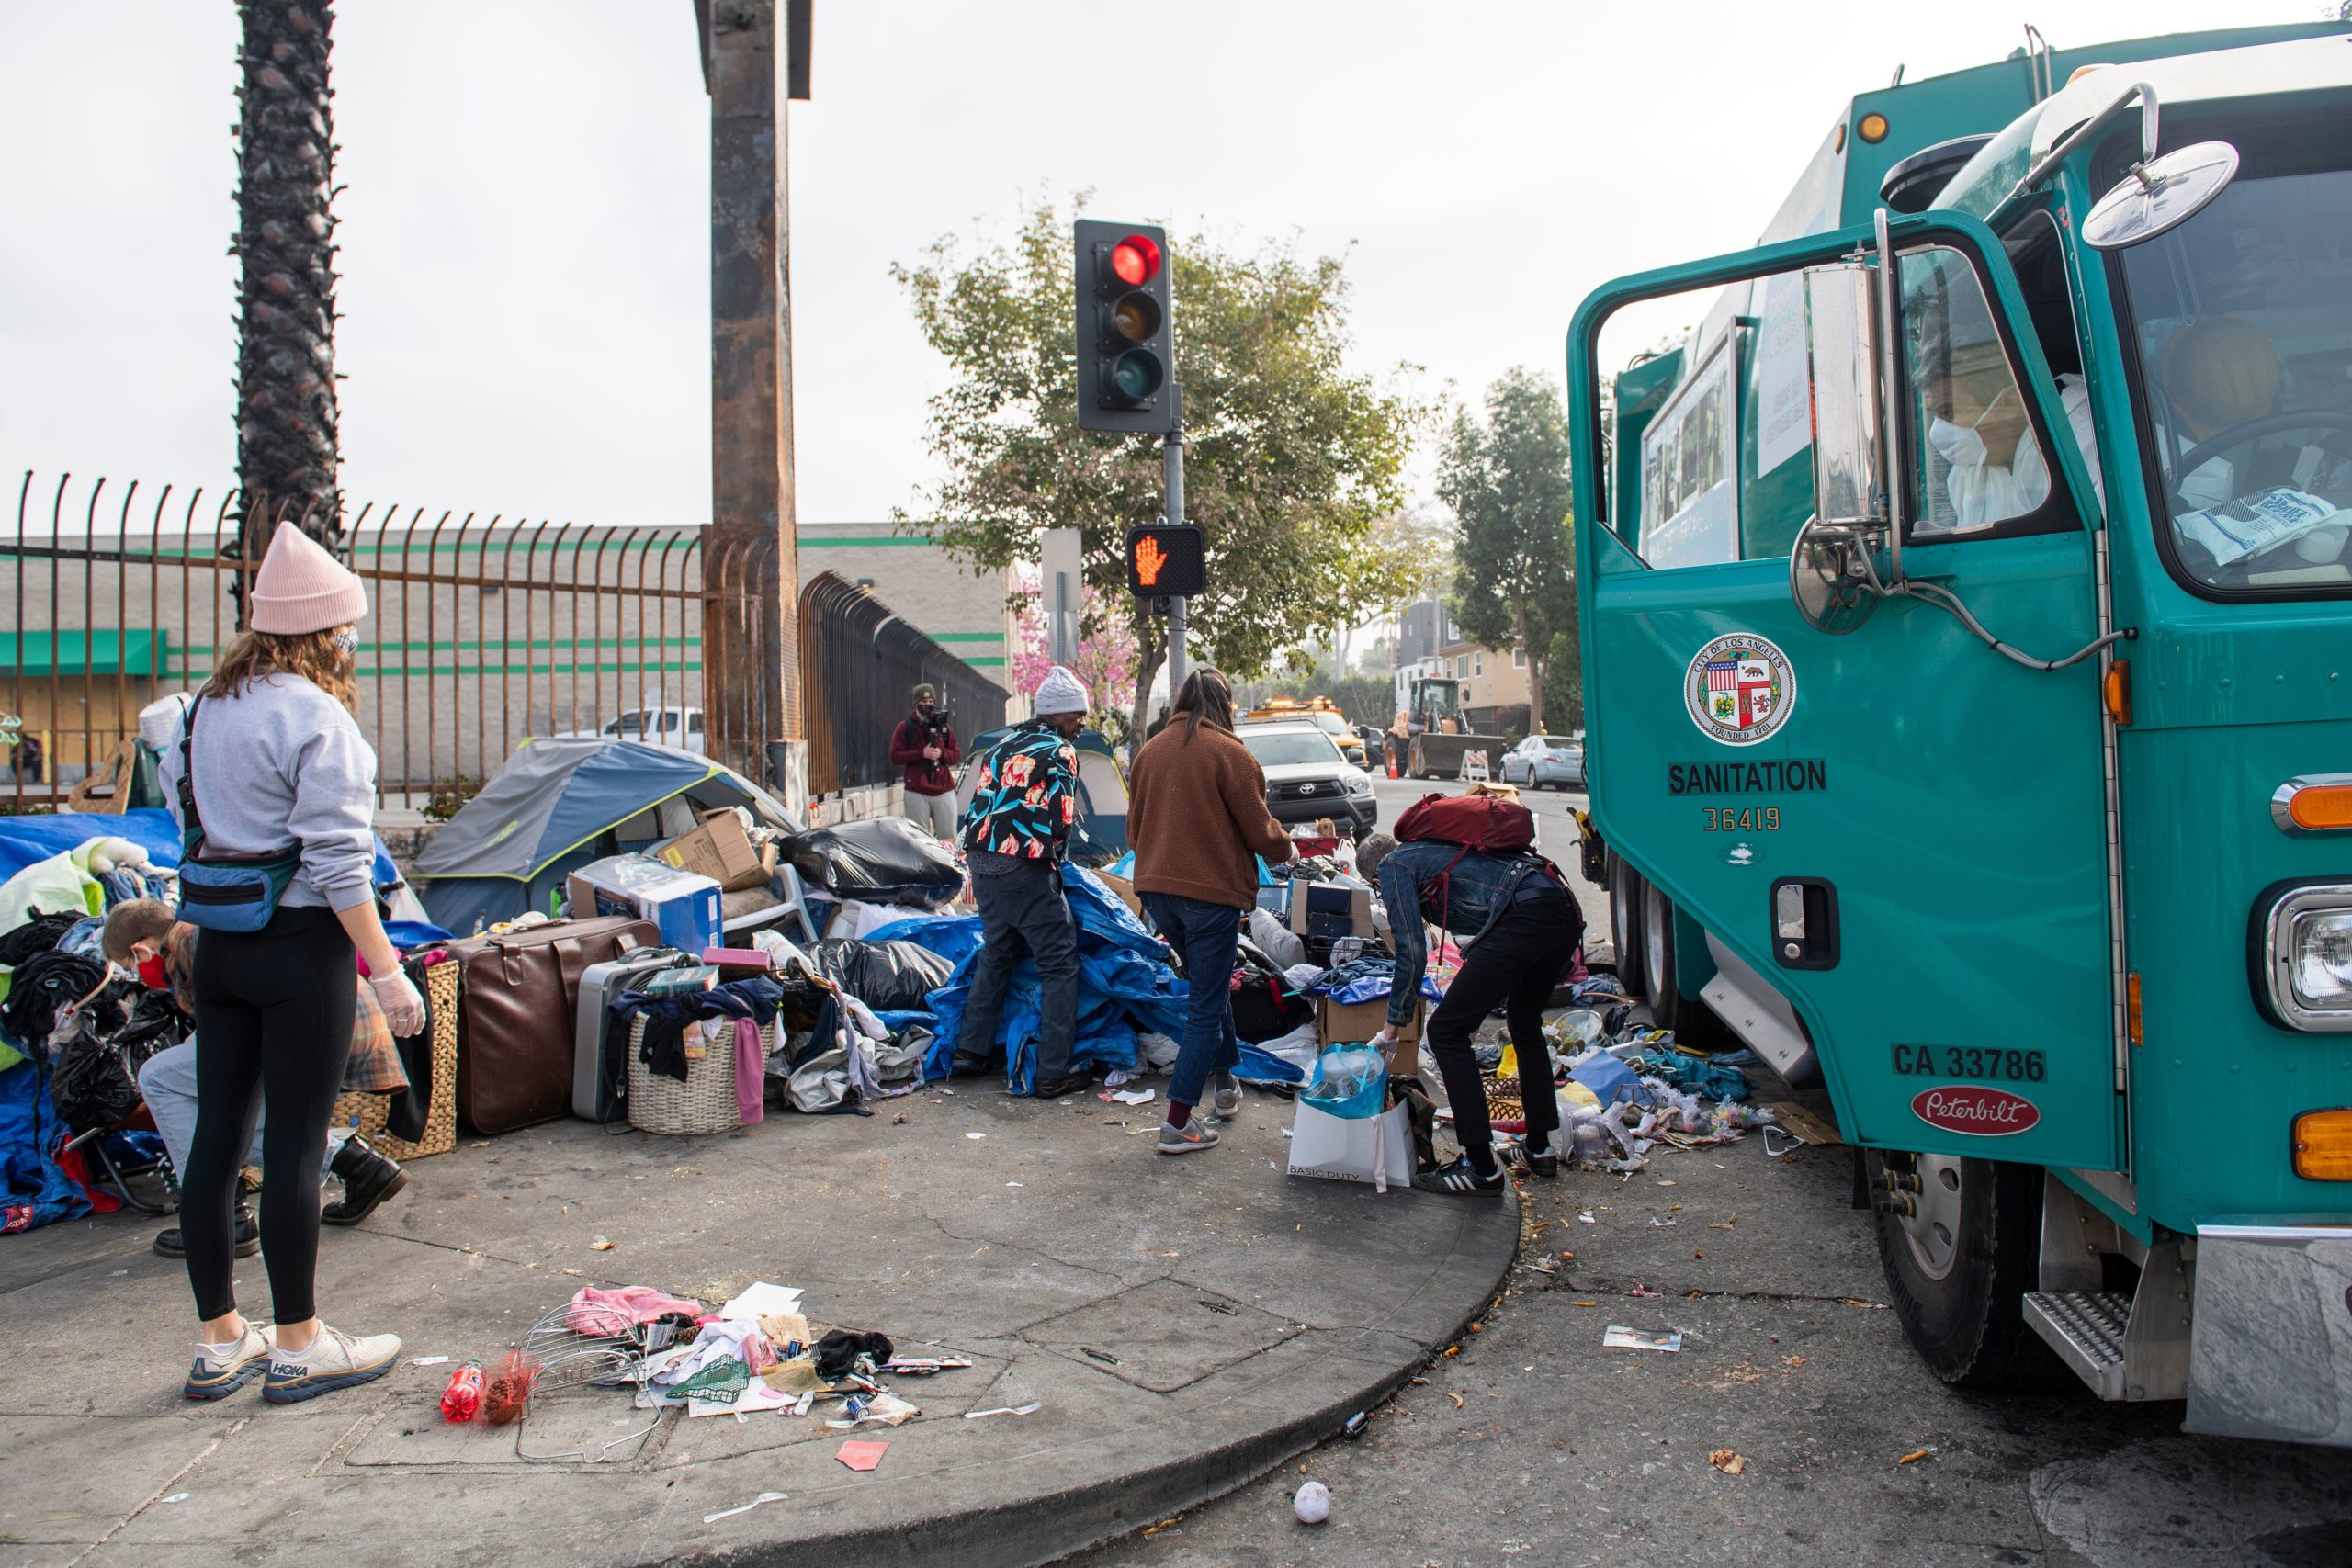 Activists help protect homeless from being displaced by street cleaning and power washing from the Los Angeles Sanitation service on Feb. 8 in Hollywood, California. (Valerie Macon/AFP via Getty Images)